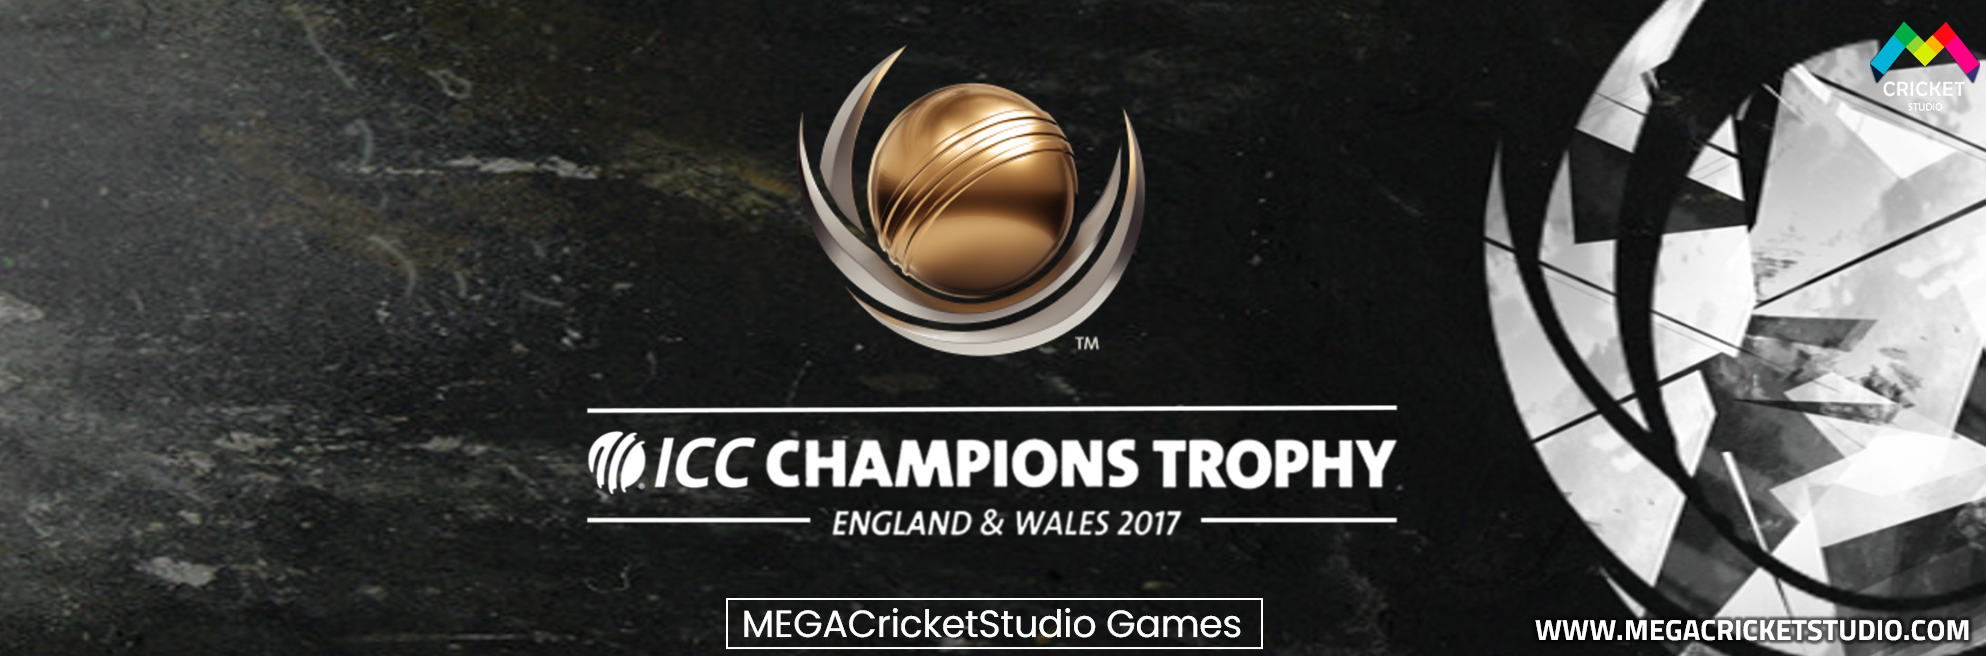 HD StudioZ ICC Champions Trophy 2017 Patch for EA Cricket 07